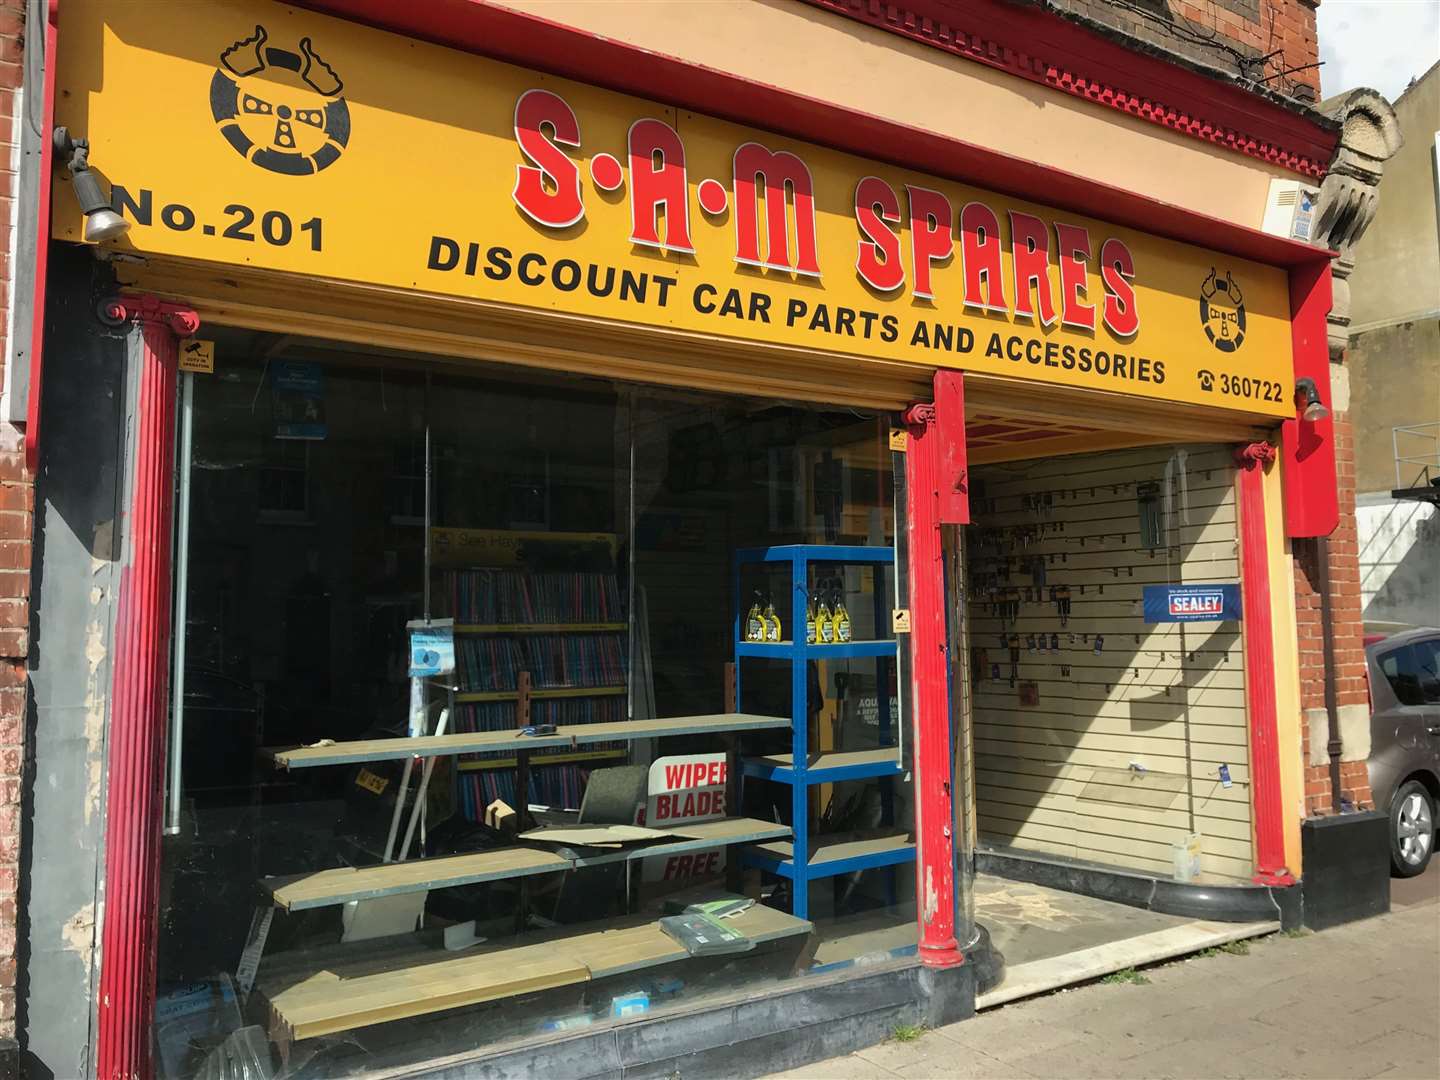 SAM Spares in Herne Bay High Street has closed (9213097)